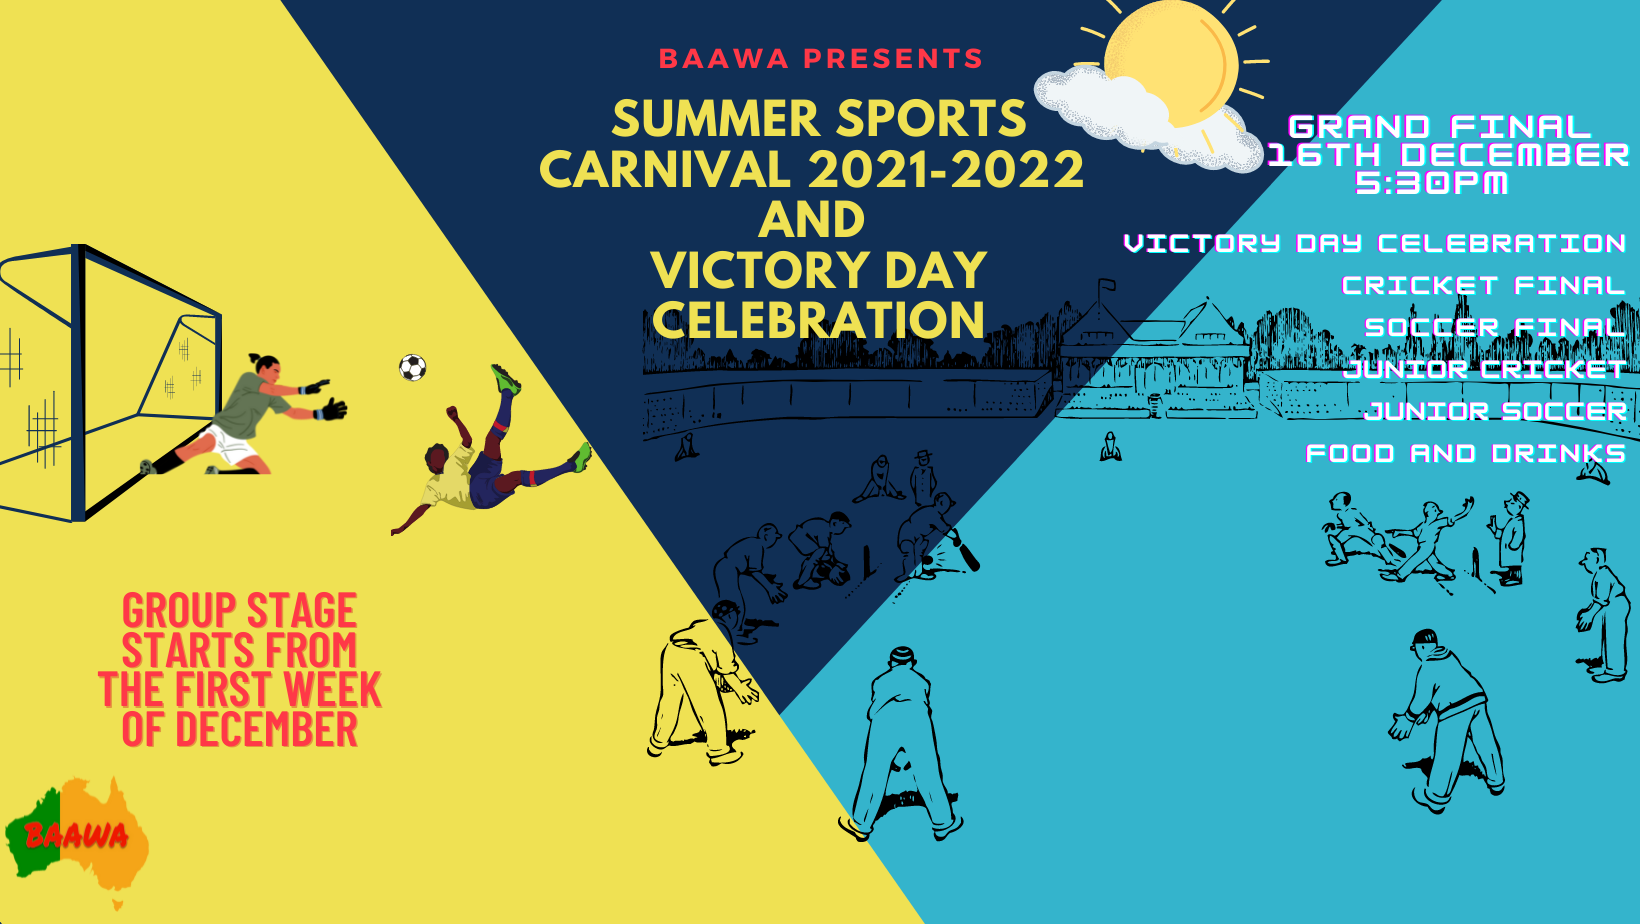 BAAWA Summer Sports Carnival 2021-2022 and Victory Day Celebration Posters (Facebook Cover).png